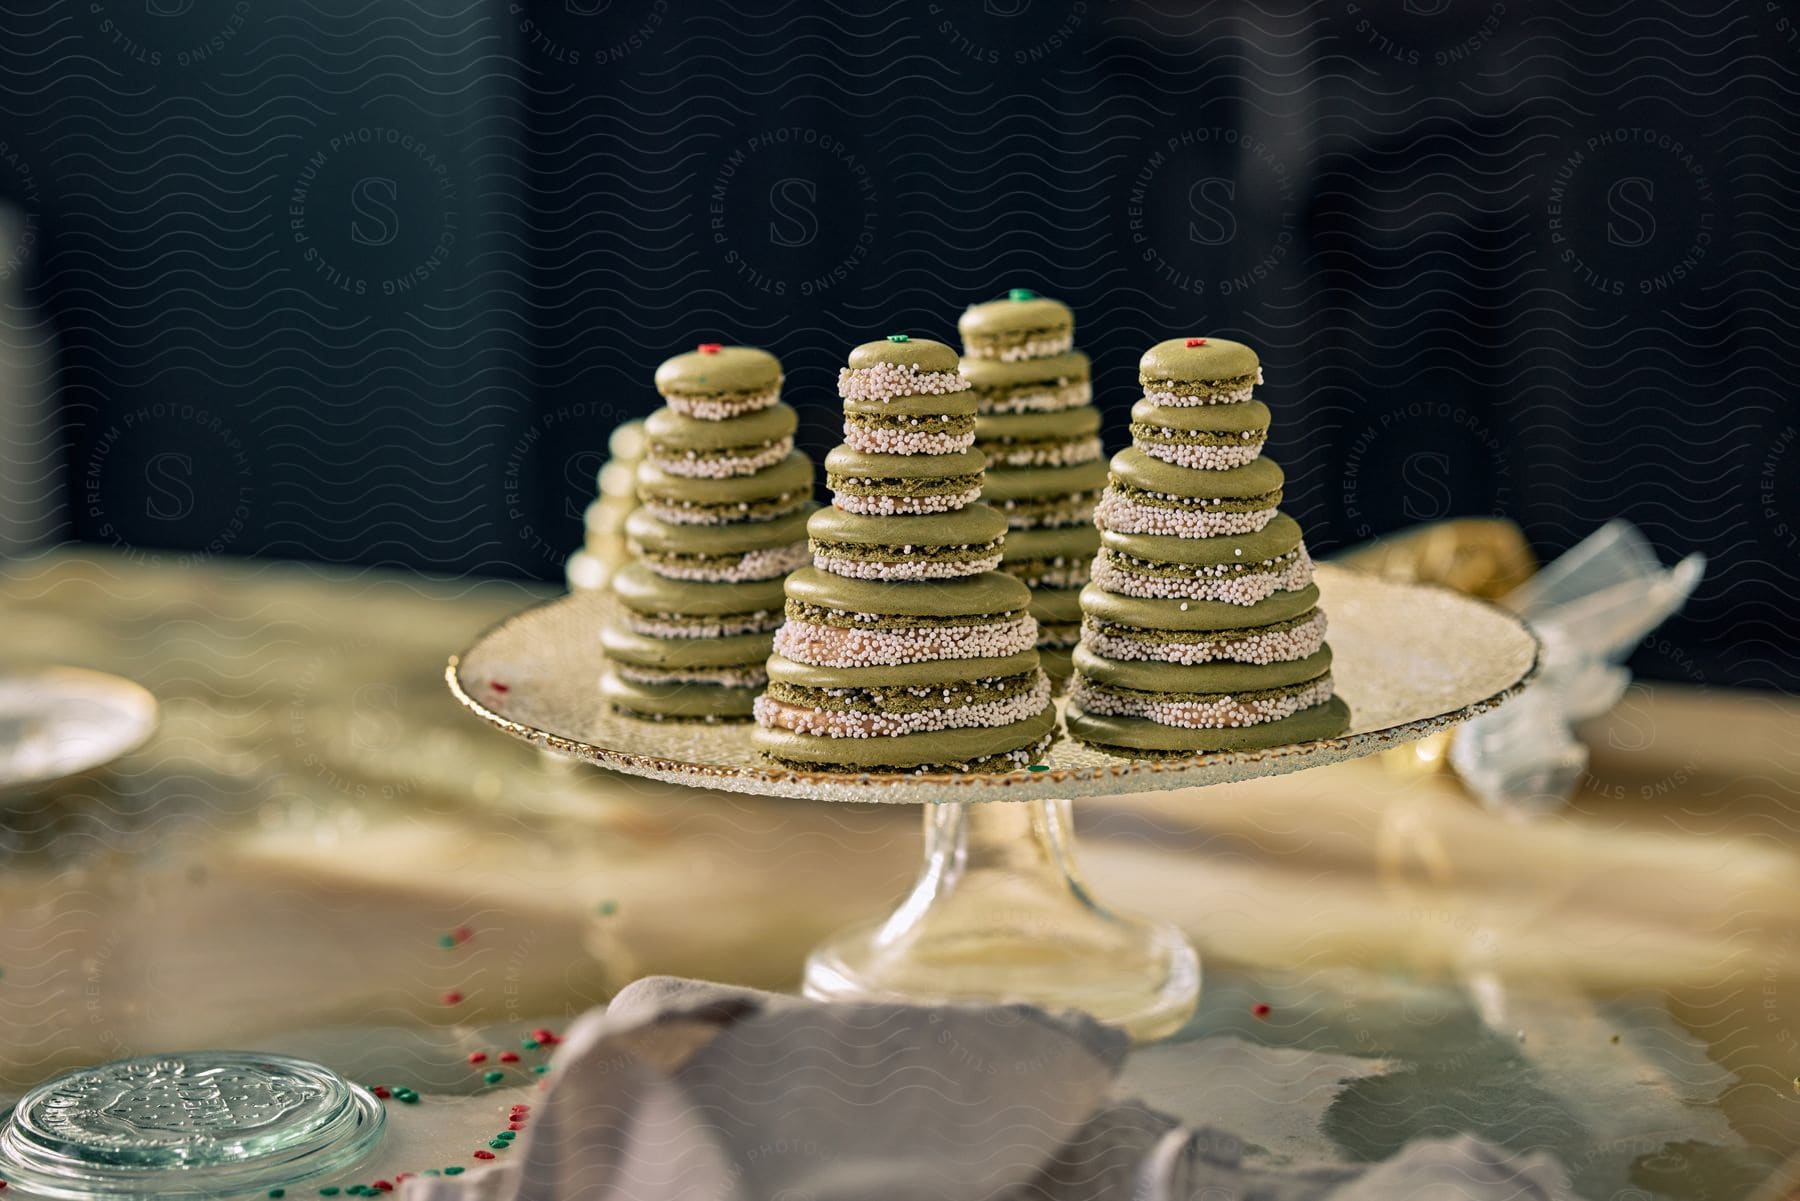 Green cookies stacked resembling Christmas trees an a serving dish.